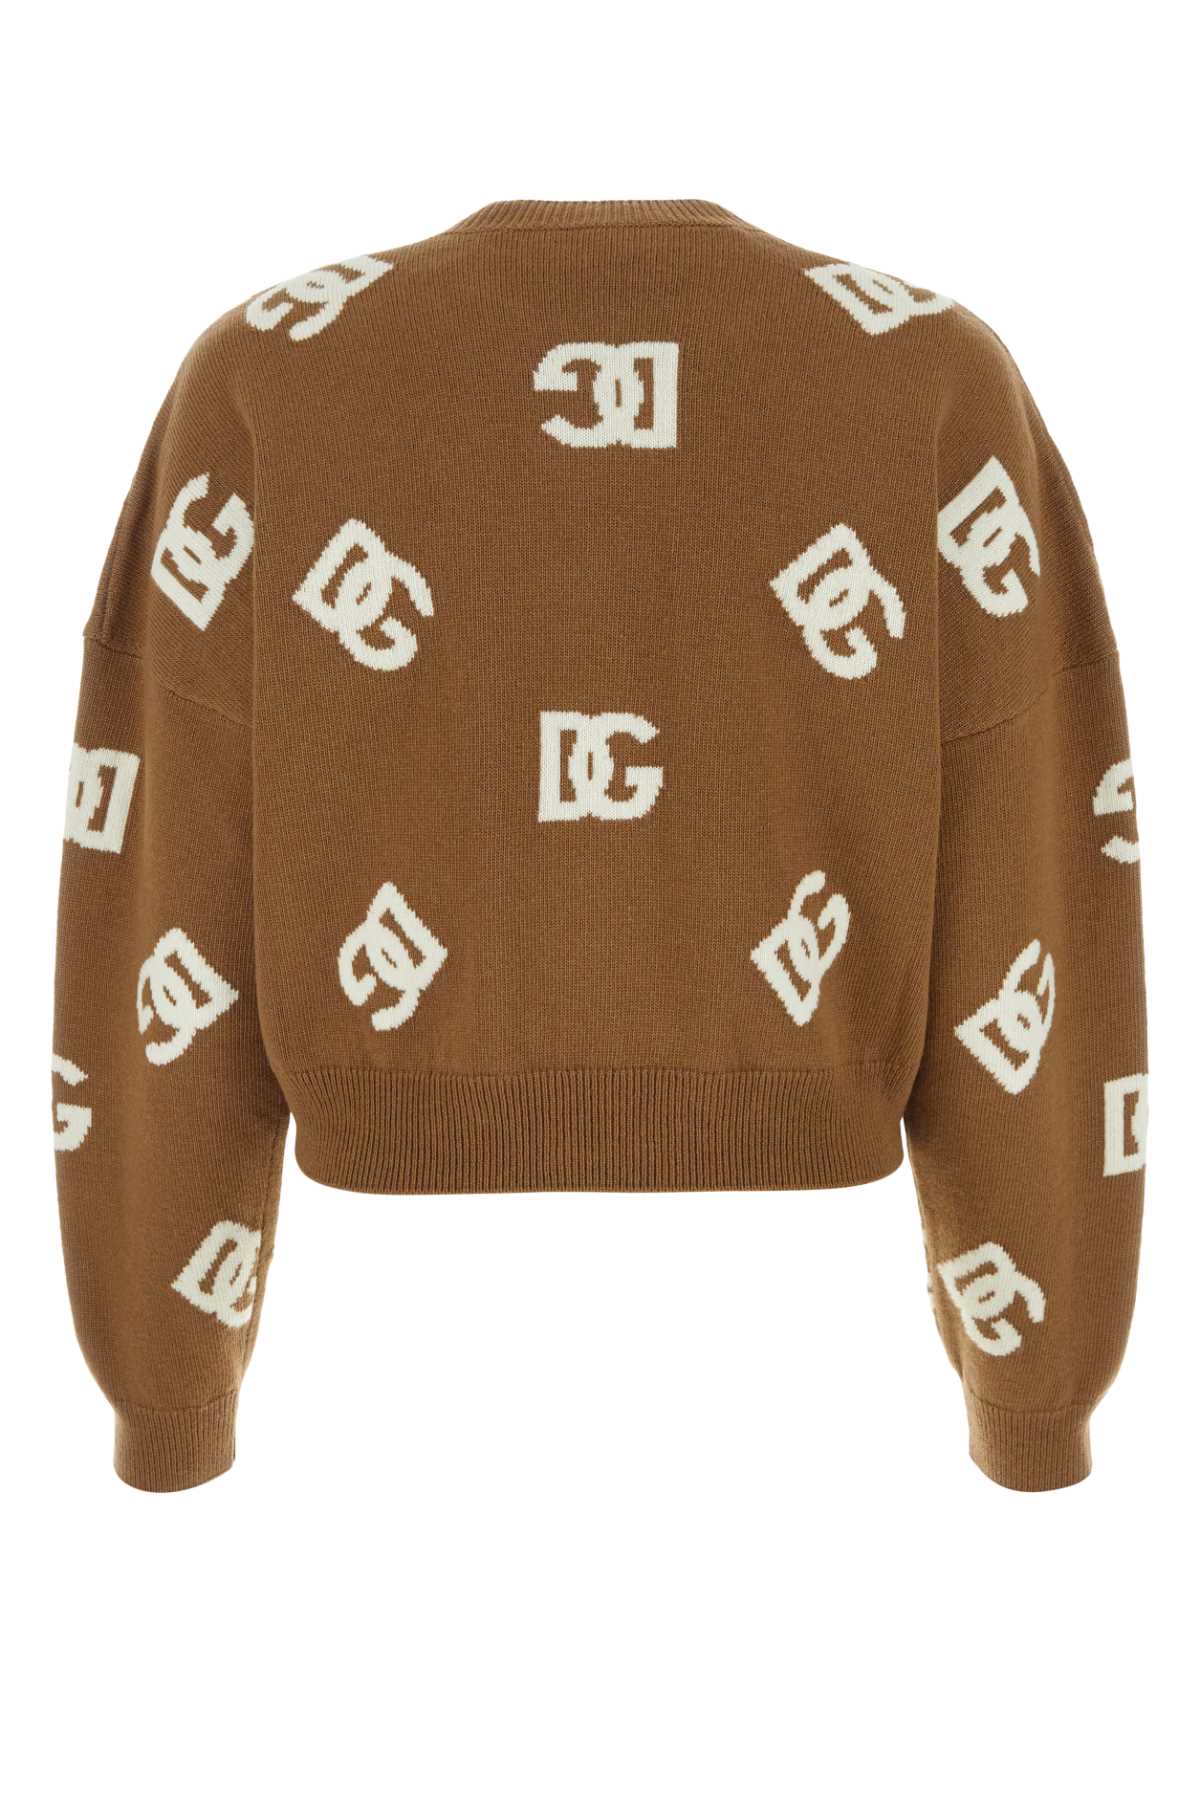 DOLCE & GABBANA EMBROIDERED WOOL SWEATER